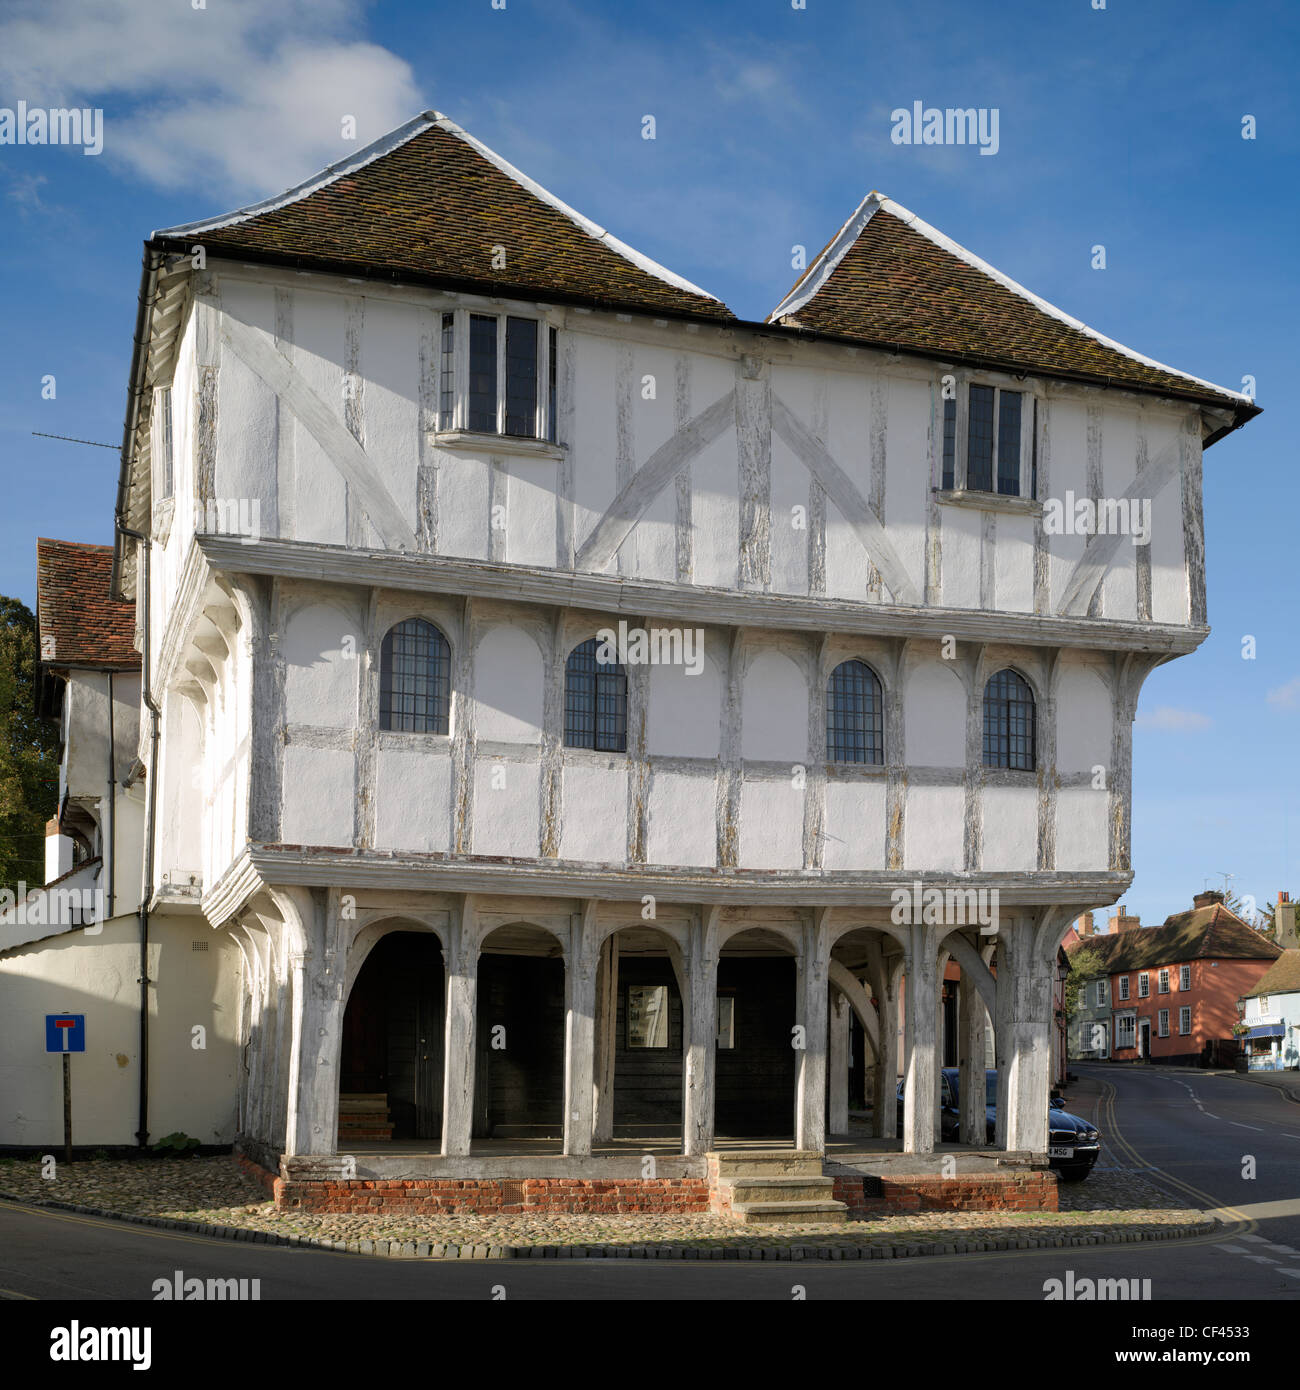 Thaxted's ancient Guildhall. It was built by the Guild of Cutlers six hundred years ago and is still in active use. Stock Photo